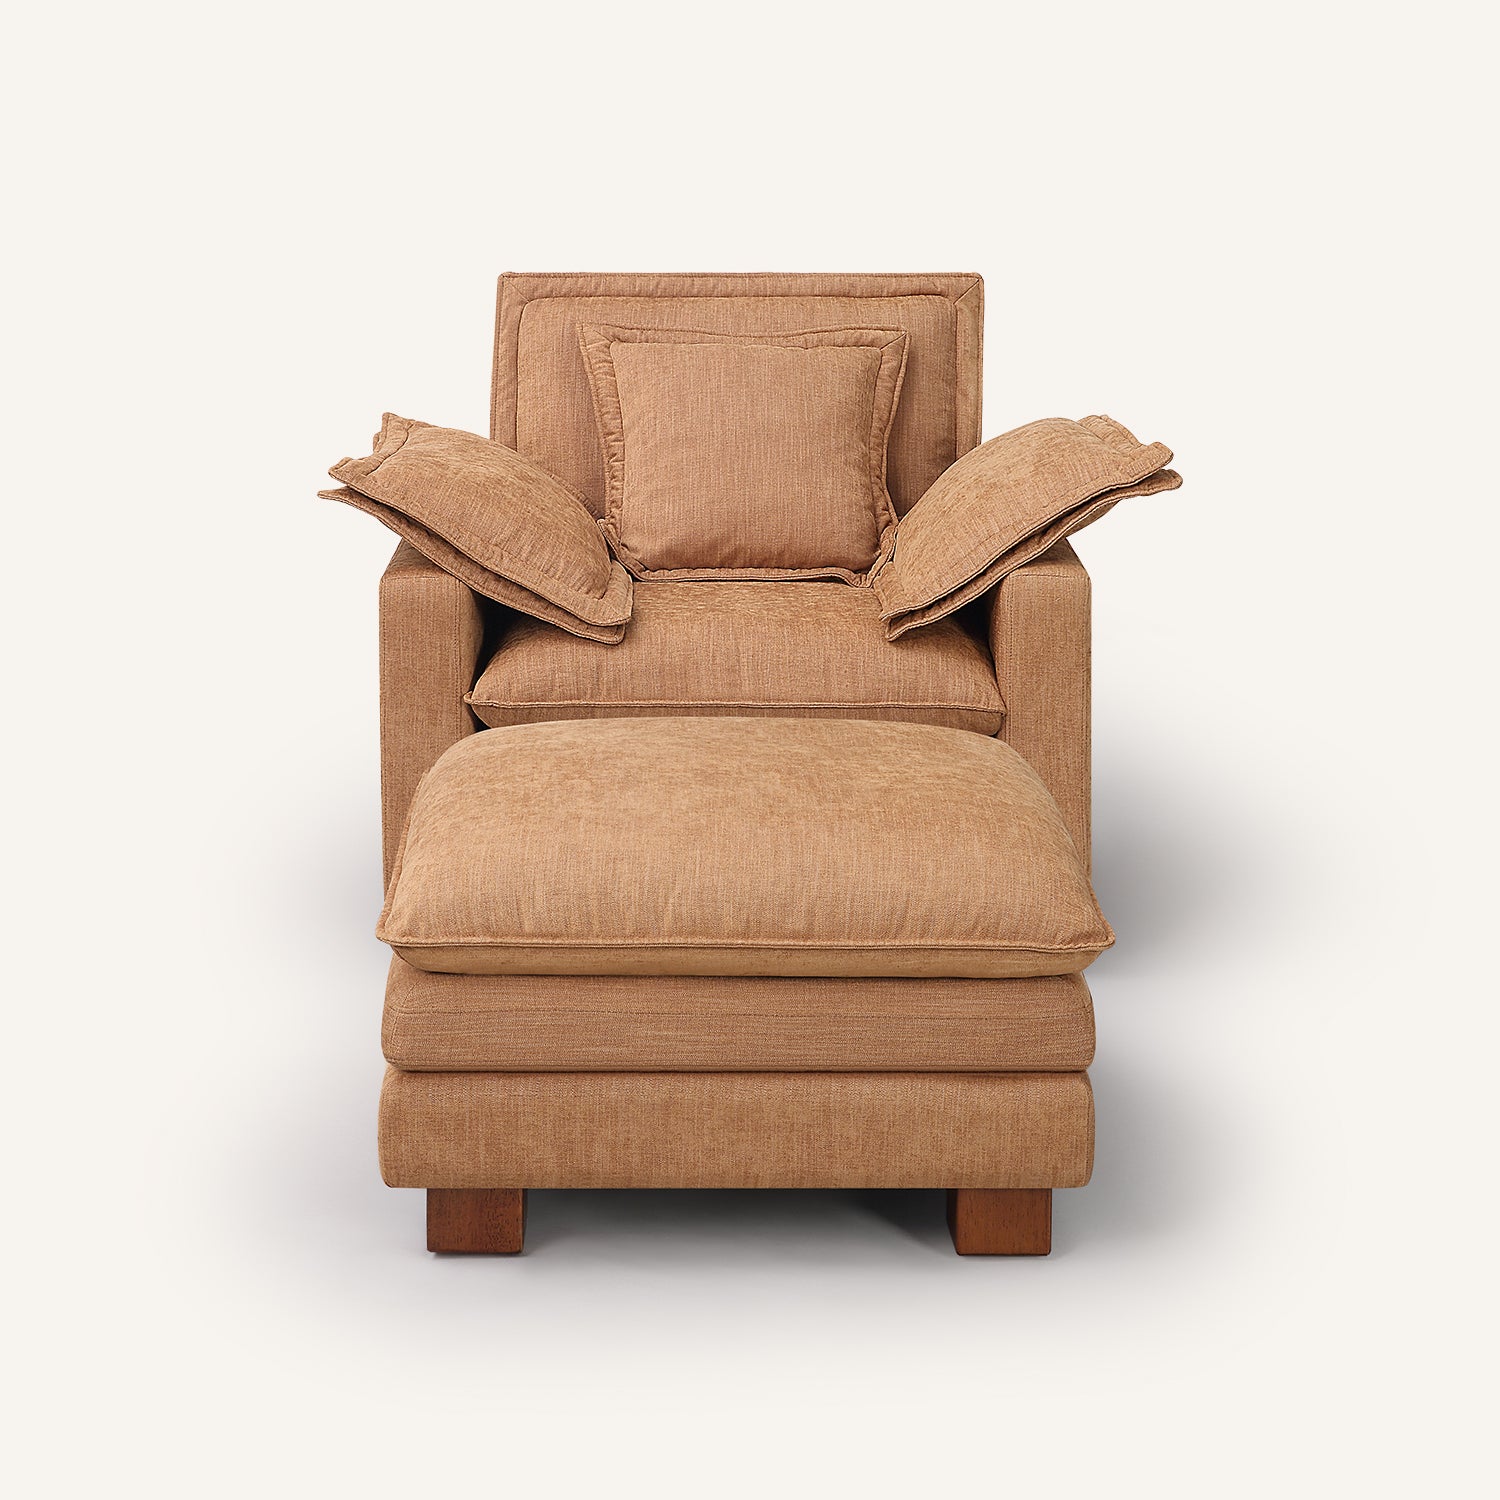 Stacked Tan Linen Armchair with Ottoman